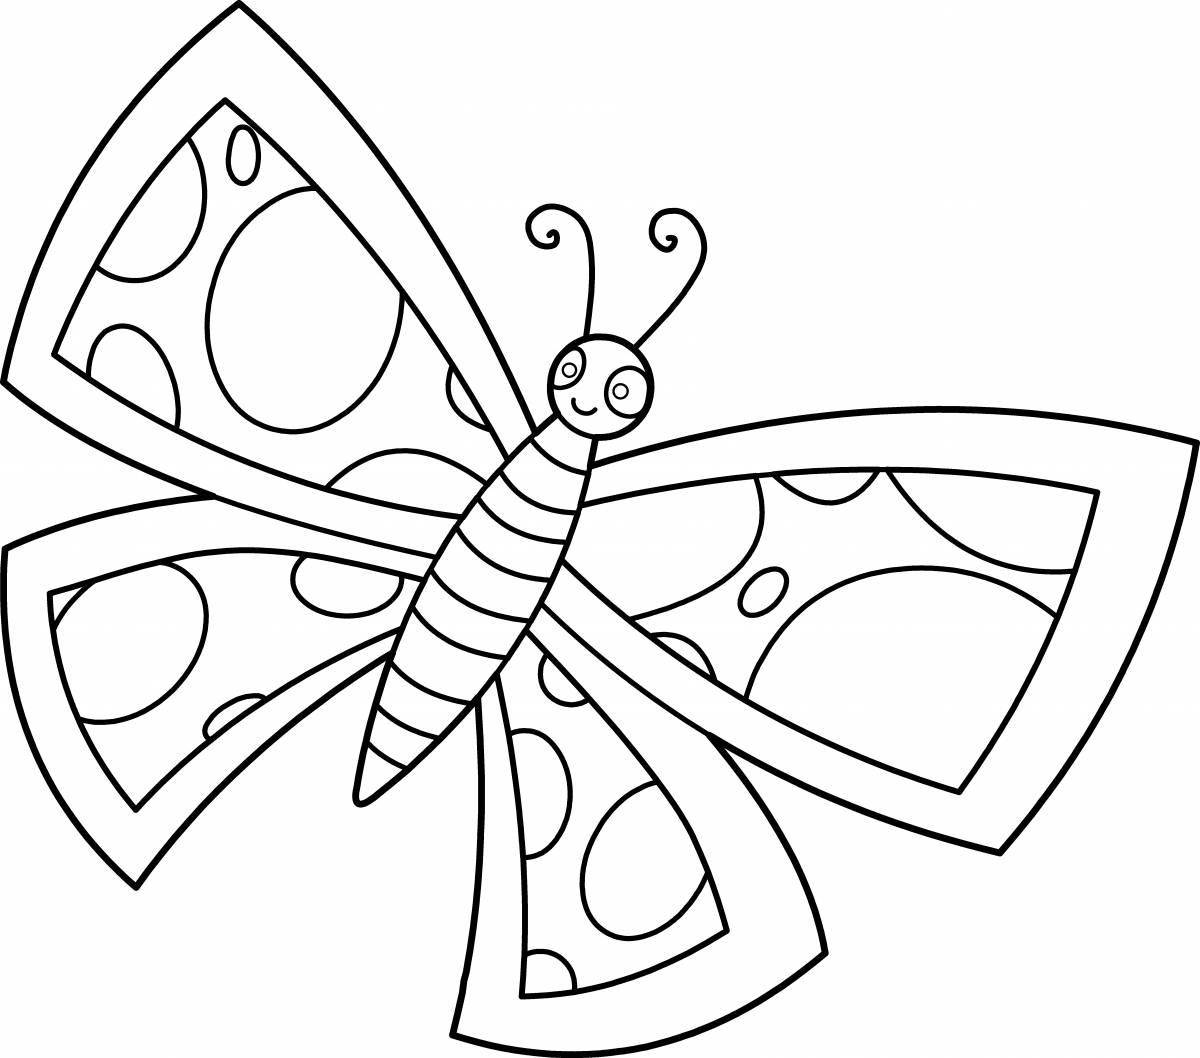 Children's butterfly coloring book